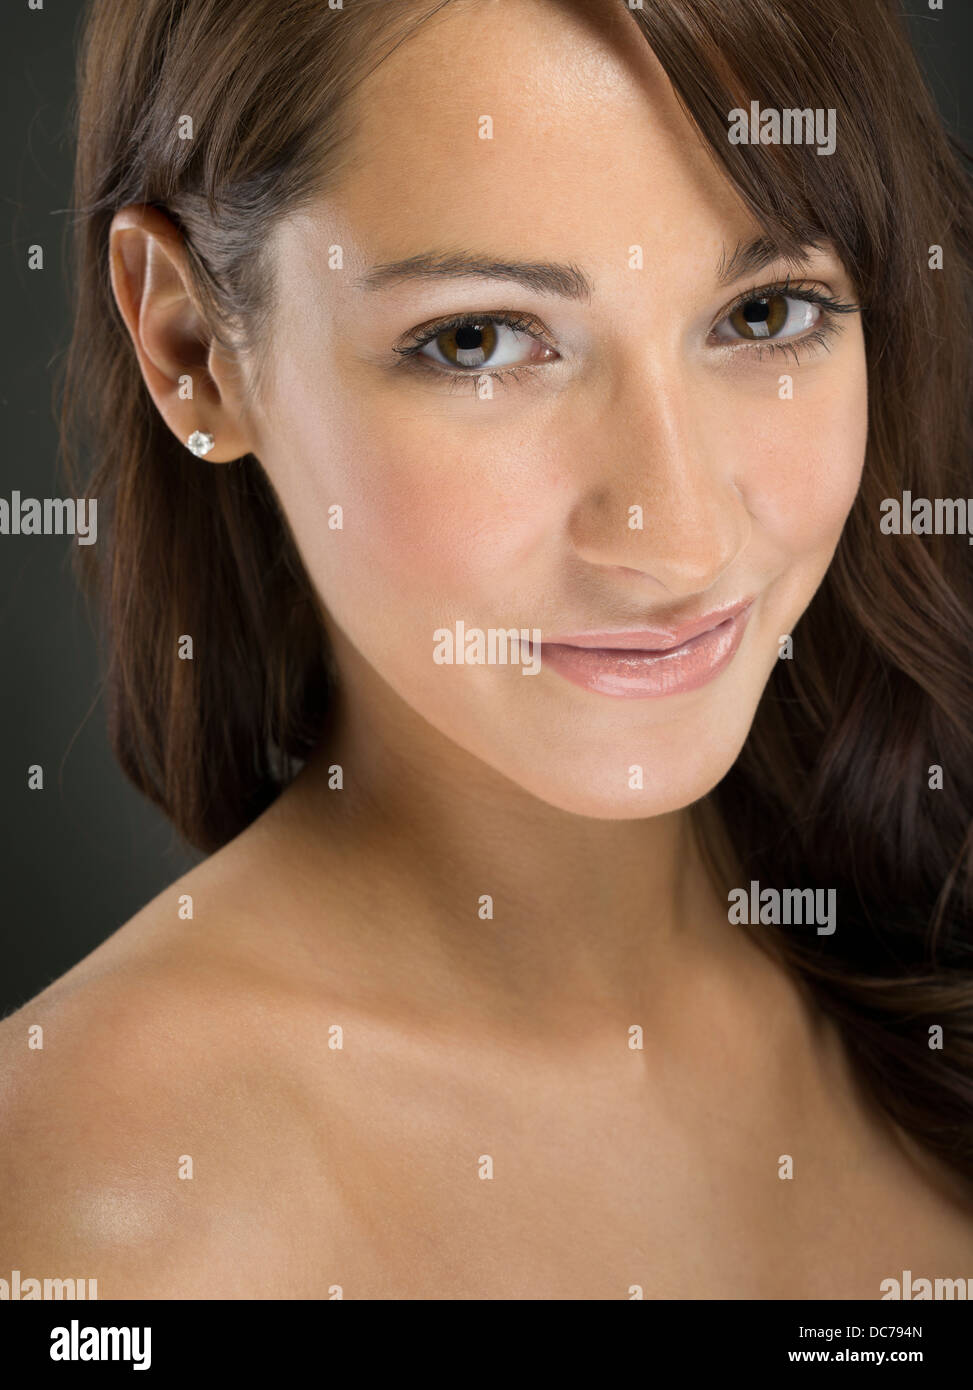 Studio portrait of beautiful young woman with long brown hair. Stock Photo